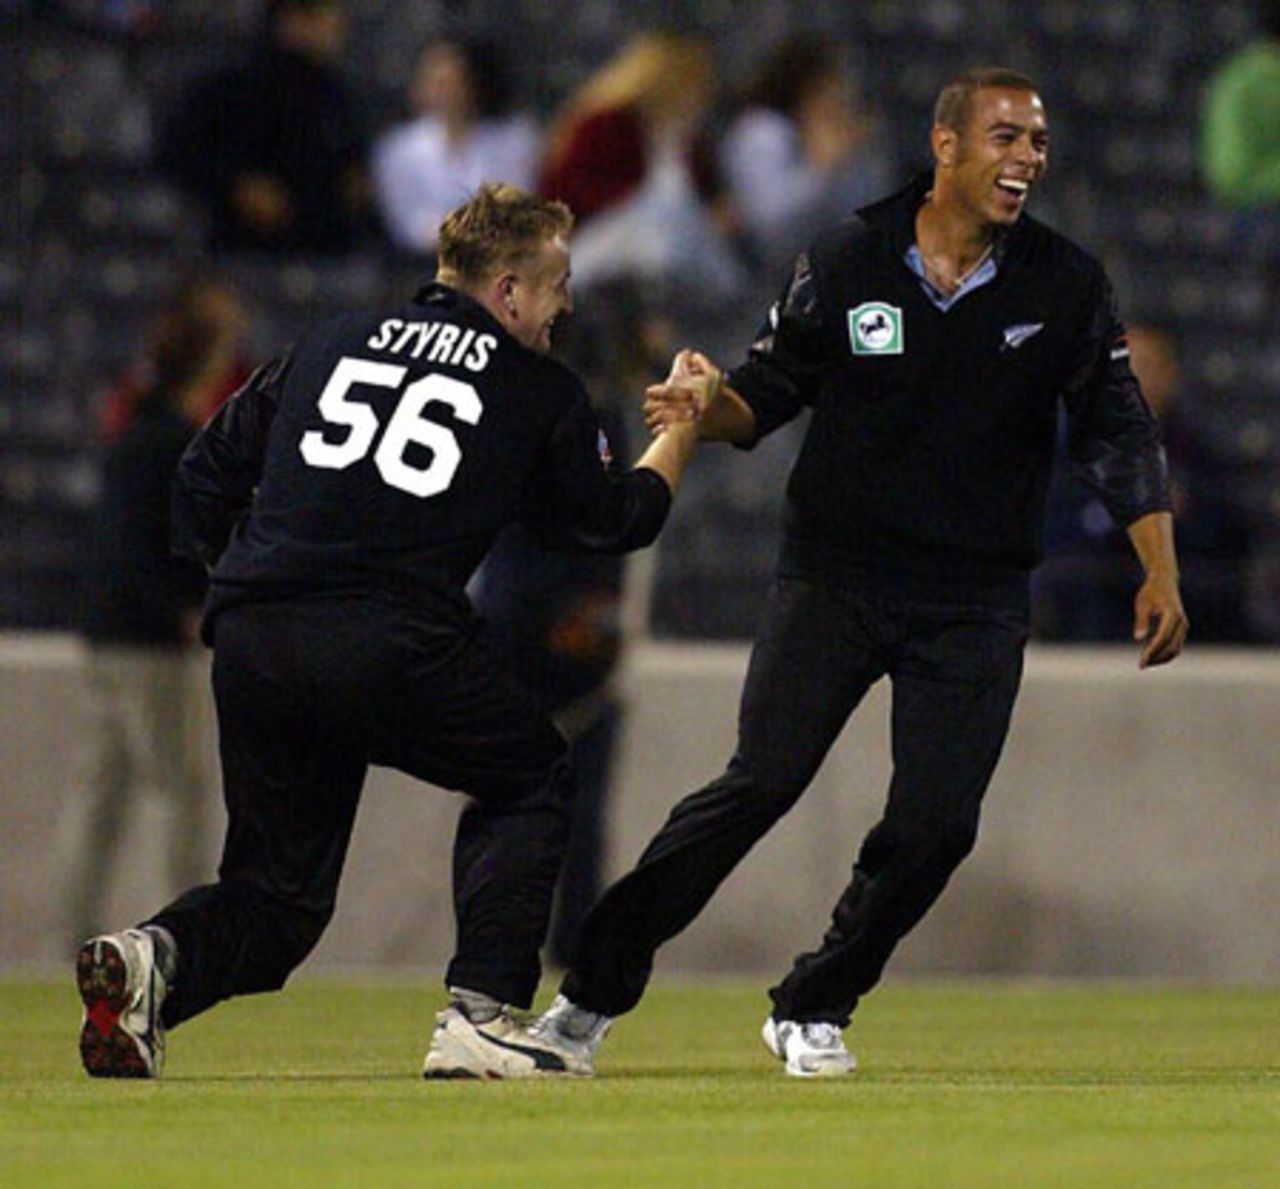 New Zealand players Scott Styris (left) and Andre Adams celebrate the dismissal of Indian batsman Sachin Tendulkar, caught by Styris off the bowling of Jacob Oram in his second innings for five. Super Max International: New Zealand v India at Jade Stadium, Christchurch, 4 December 2002.